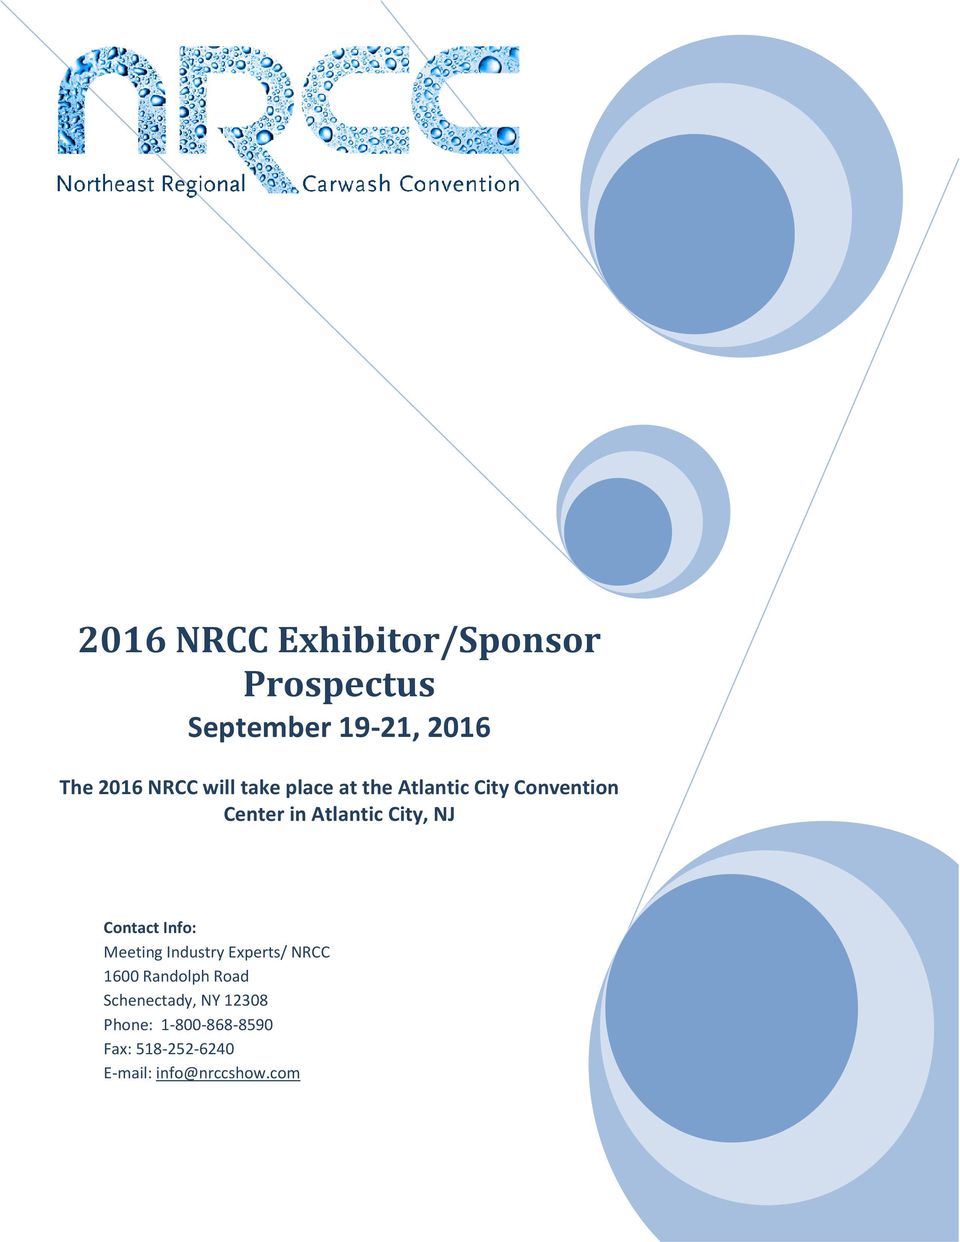 Contact Info: Meeting Industry Experts/ NRCC 1600 Randolph Road